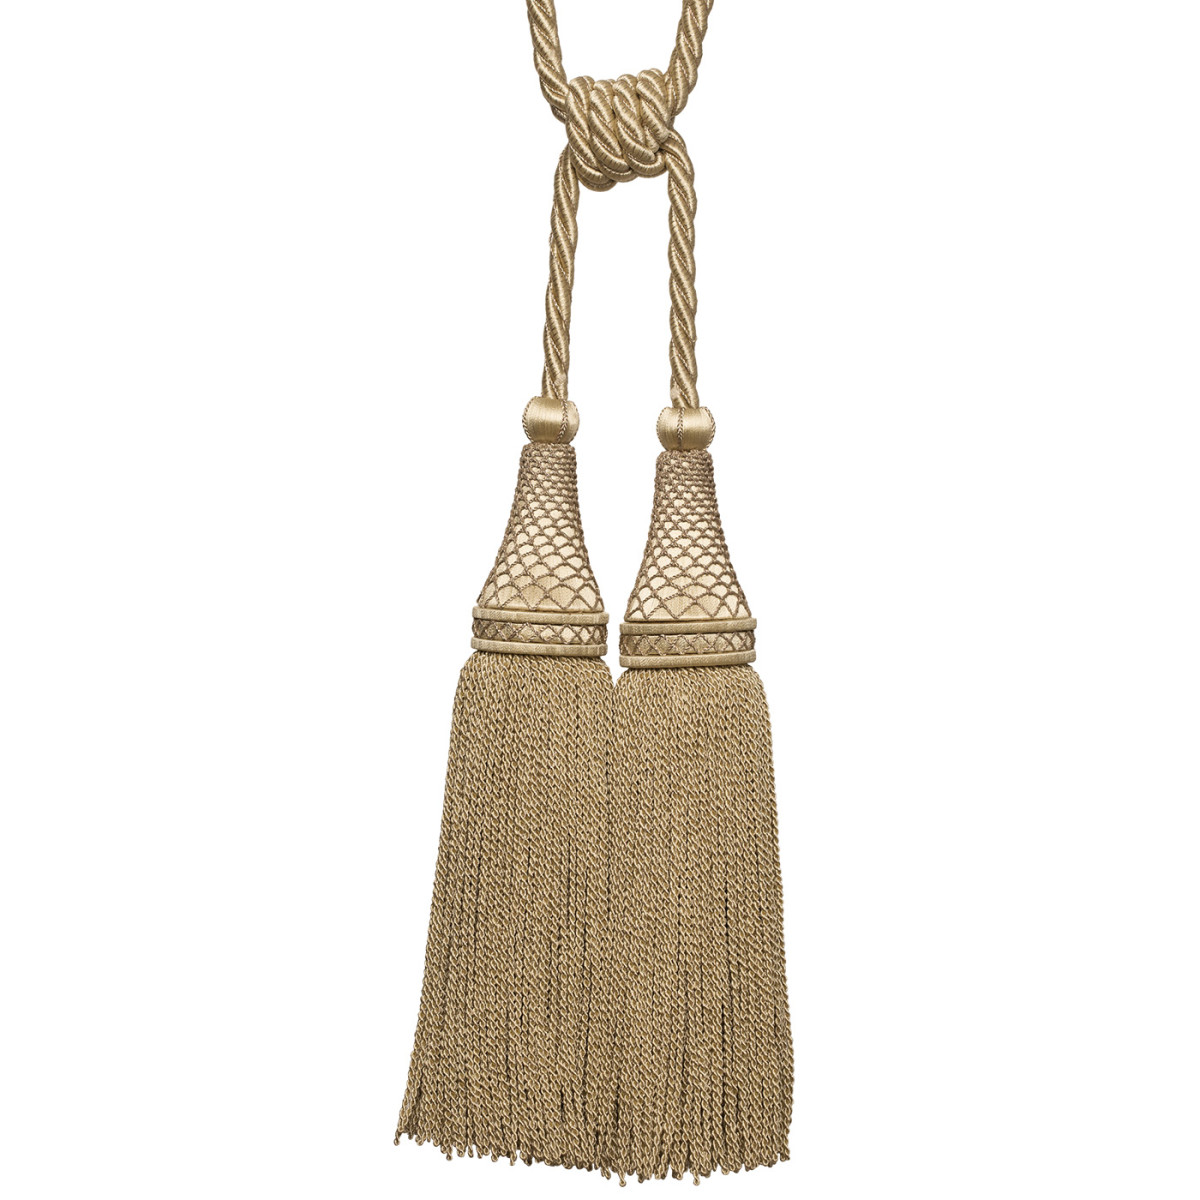 OBERON DOUBLE TASSEL TIEBACK - WHITE GOLD - Samuel and Sons